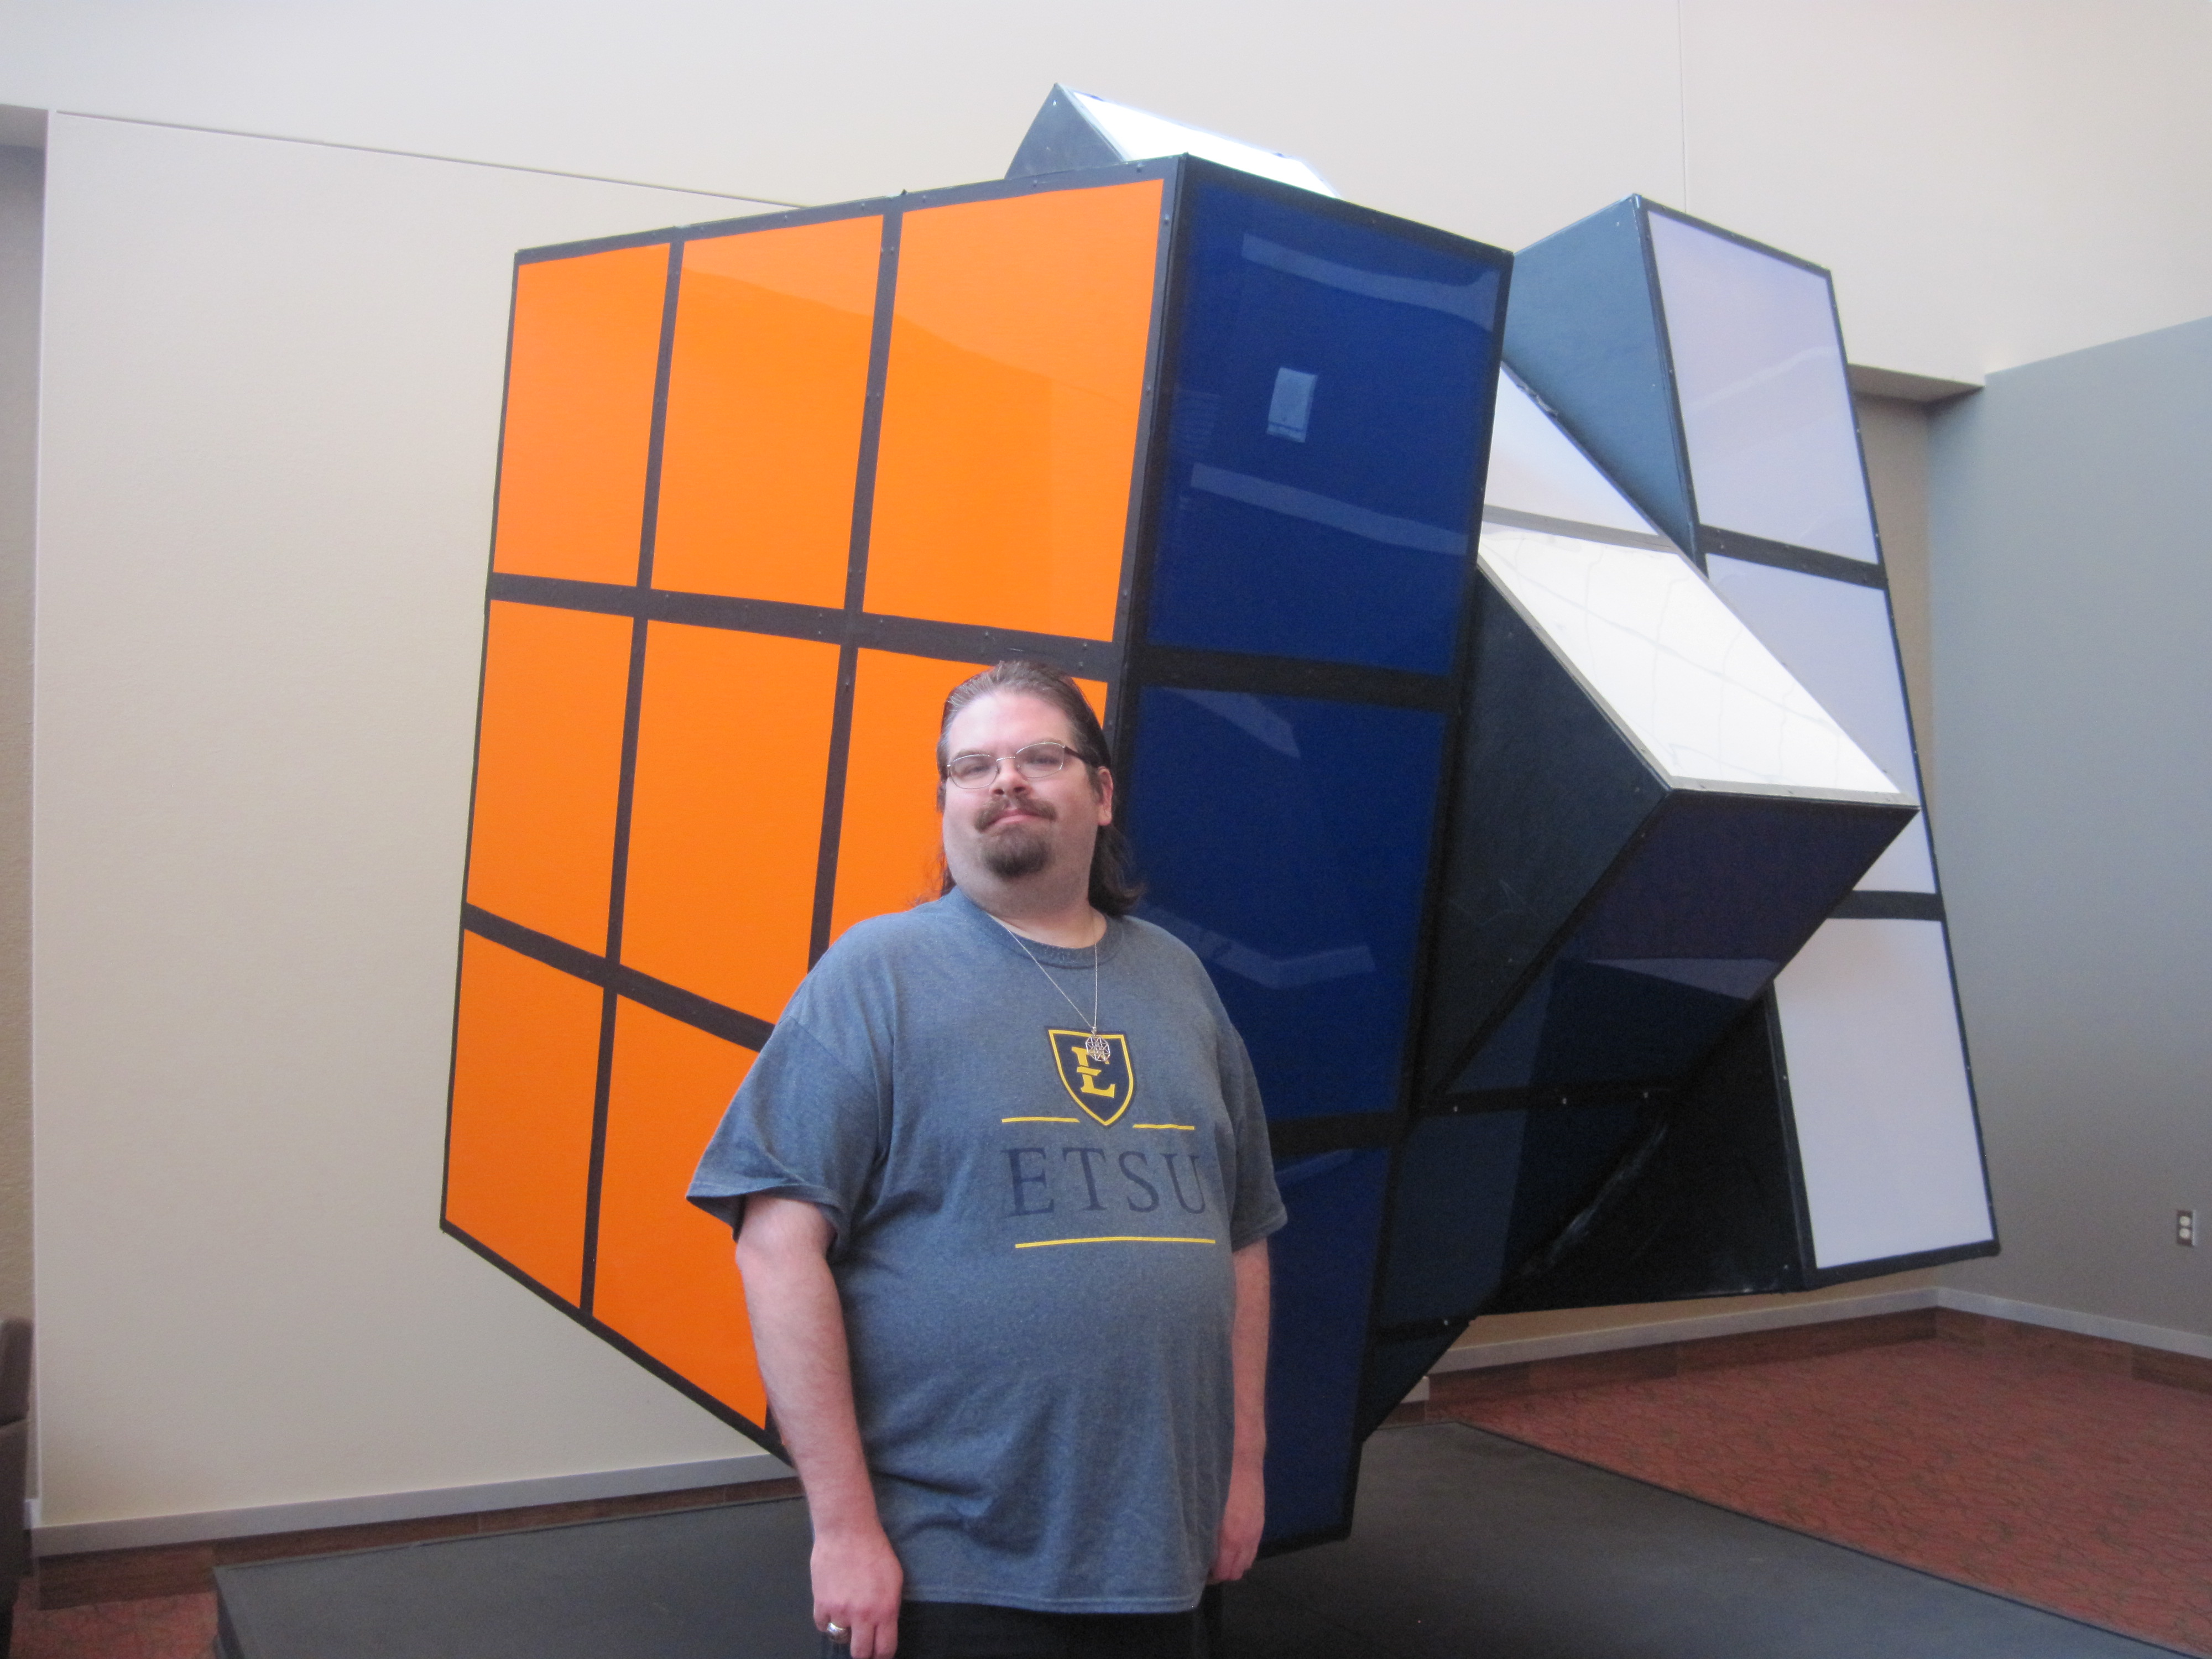 Dr. Beeler next to the Rubik's Cube Exhibit from the 1982 World's Fair